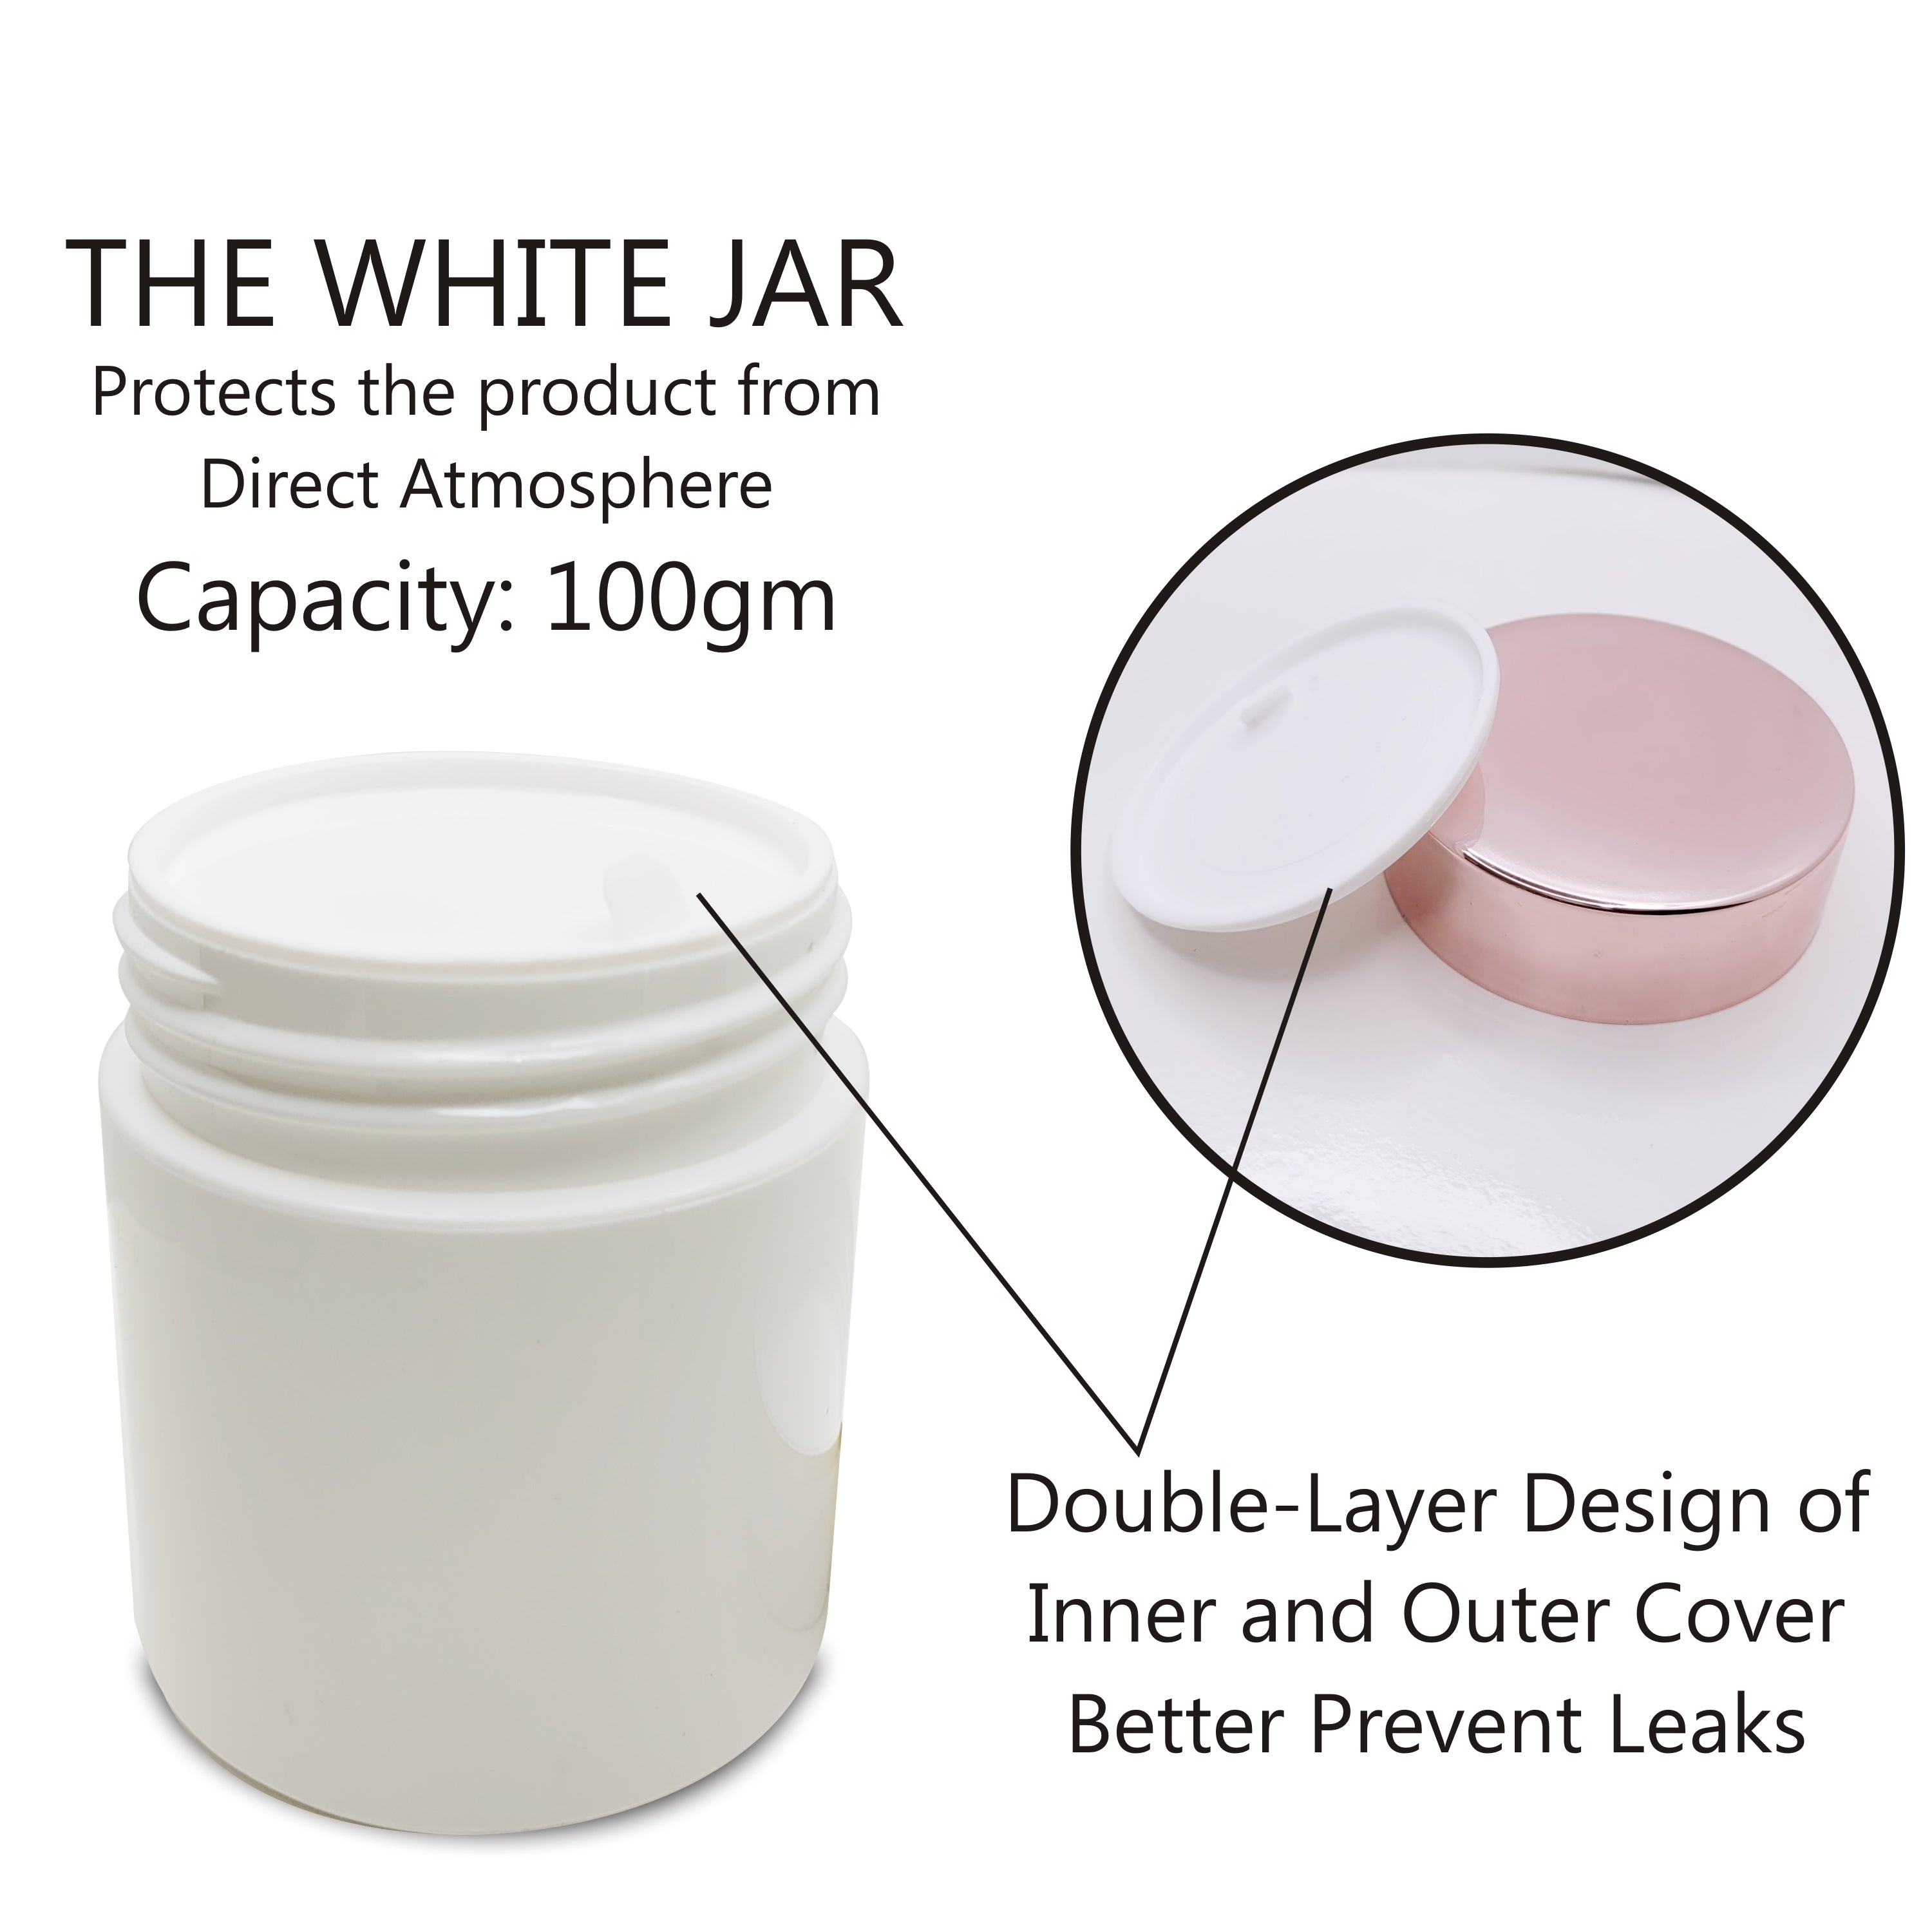 empty white color jar , cosmetic jars , rose gold caps , 50 gm 100gmjars , jars , containers , cream jars , lotion jars , empty cosmetic jars , zenvista jars , jars for moisturizers , reusable jars , recyclable jars .